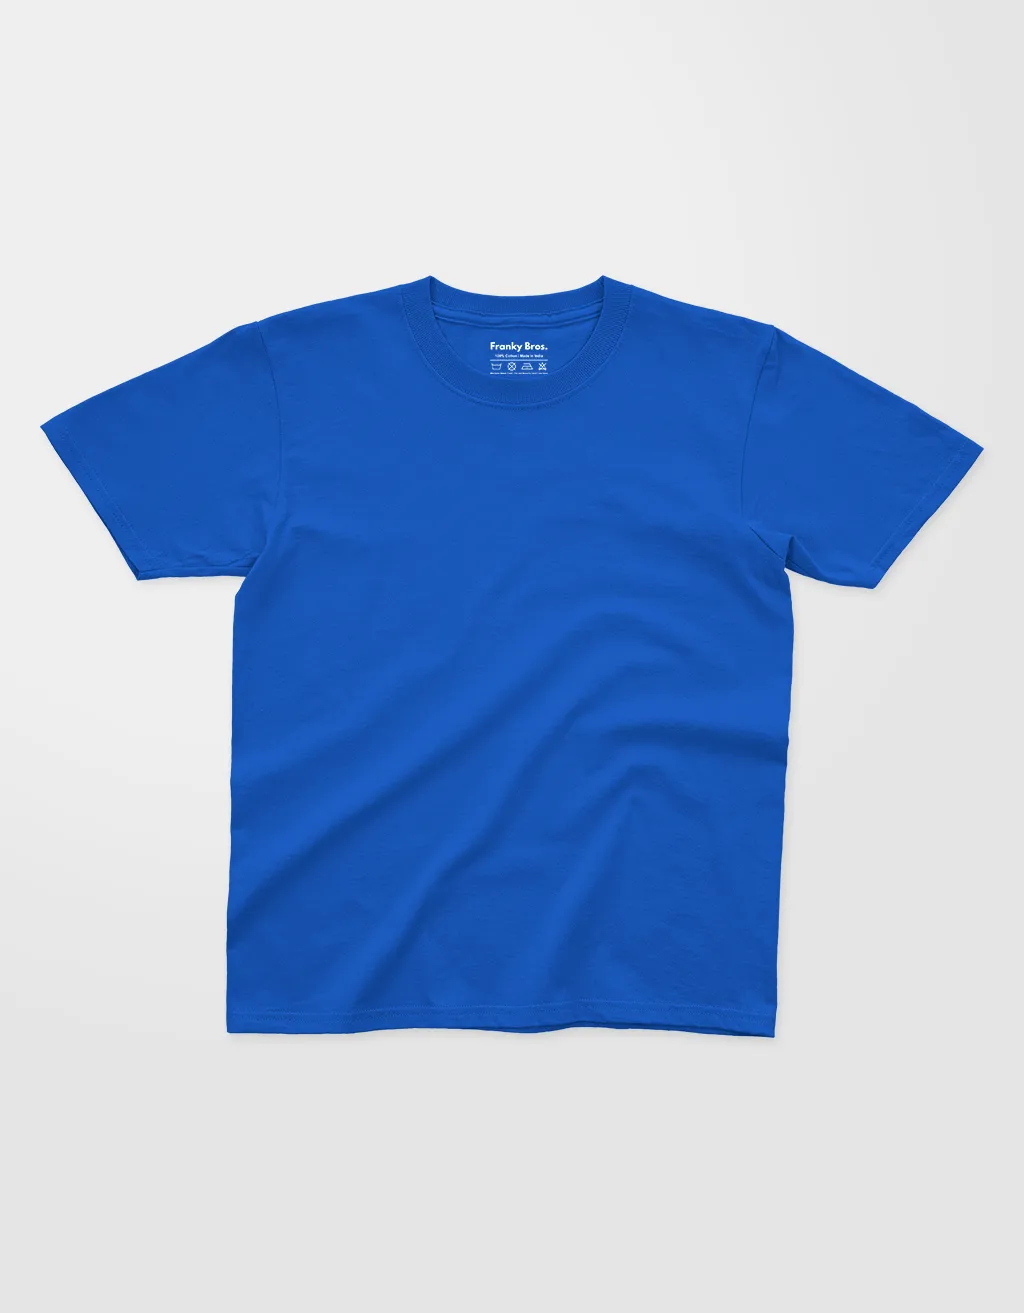 royal blue kids t shirts for girls and boys online india